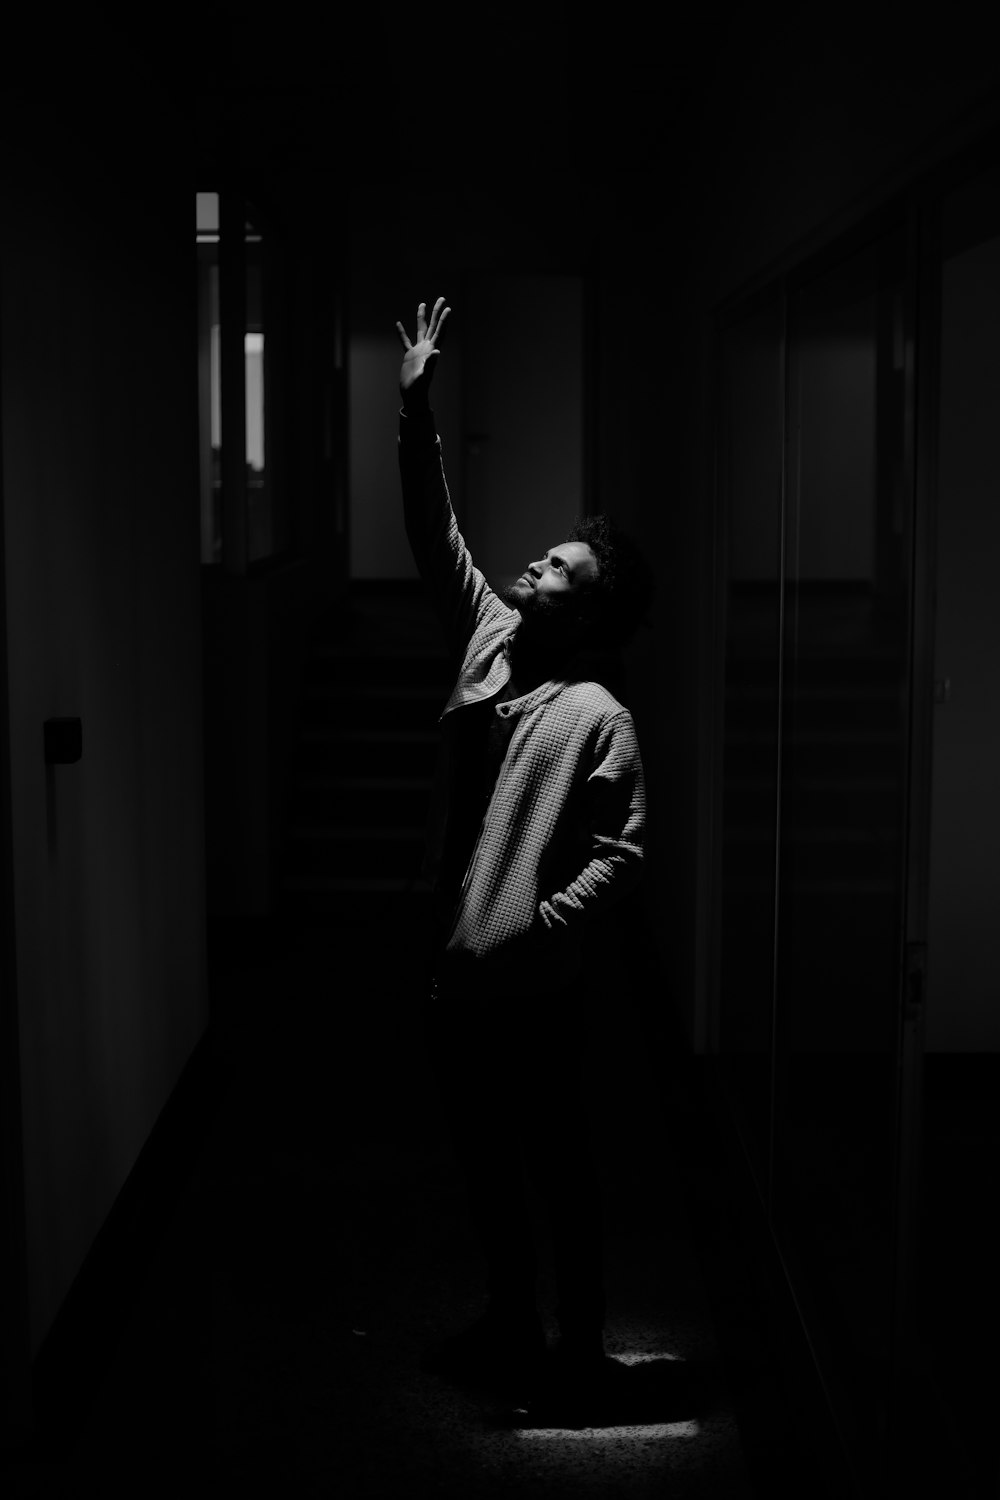 a person standing in a dark room reaching up